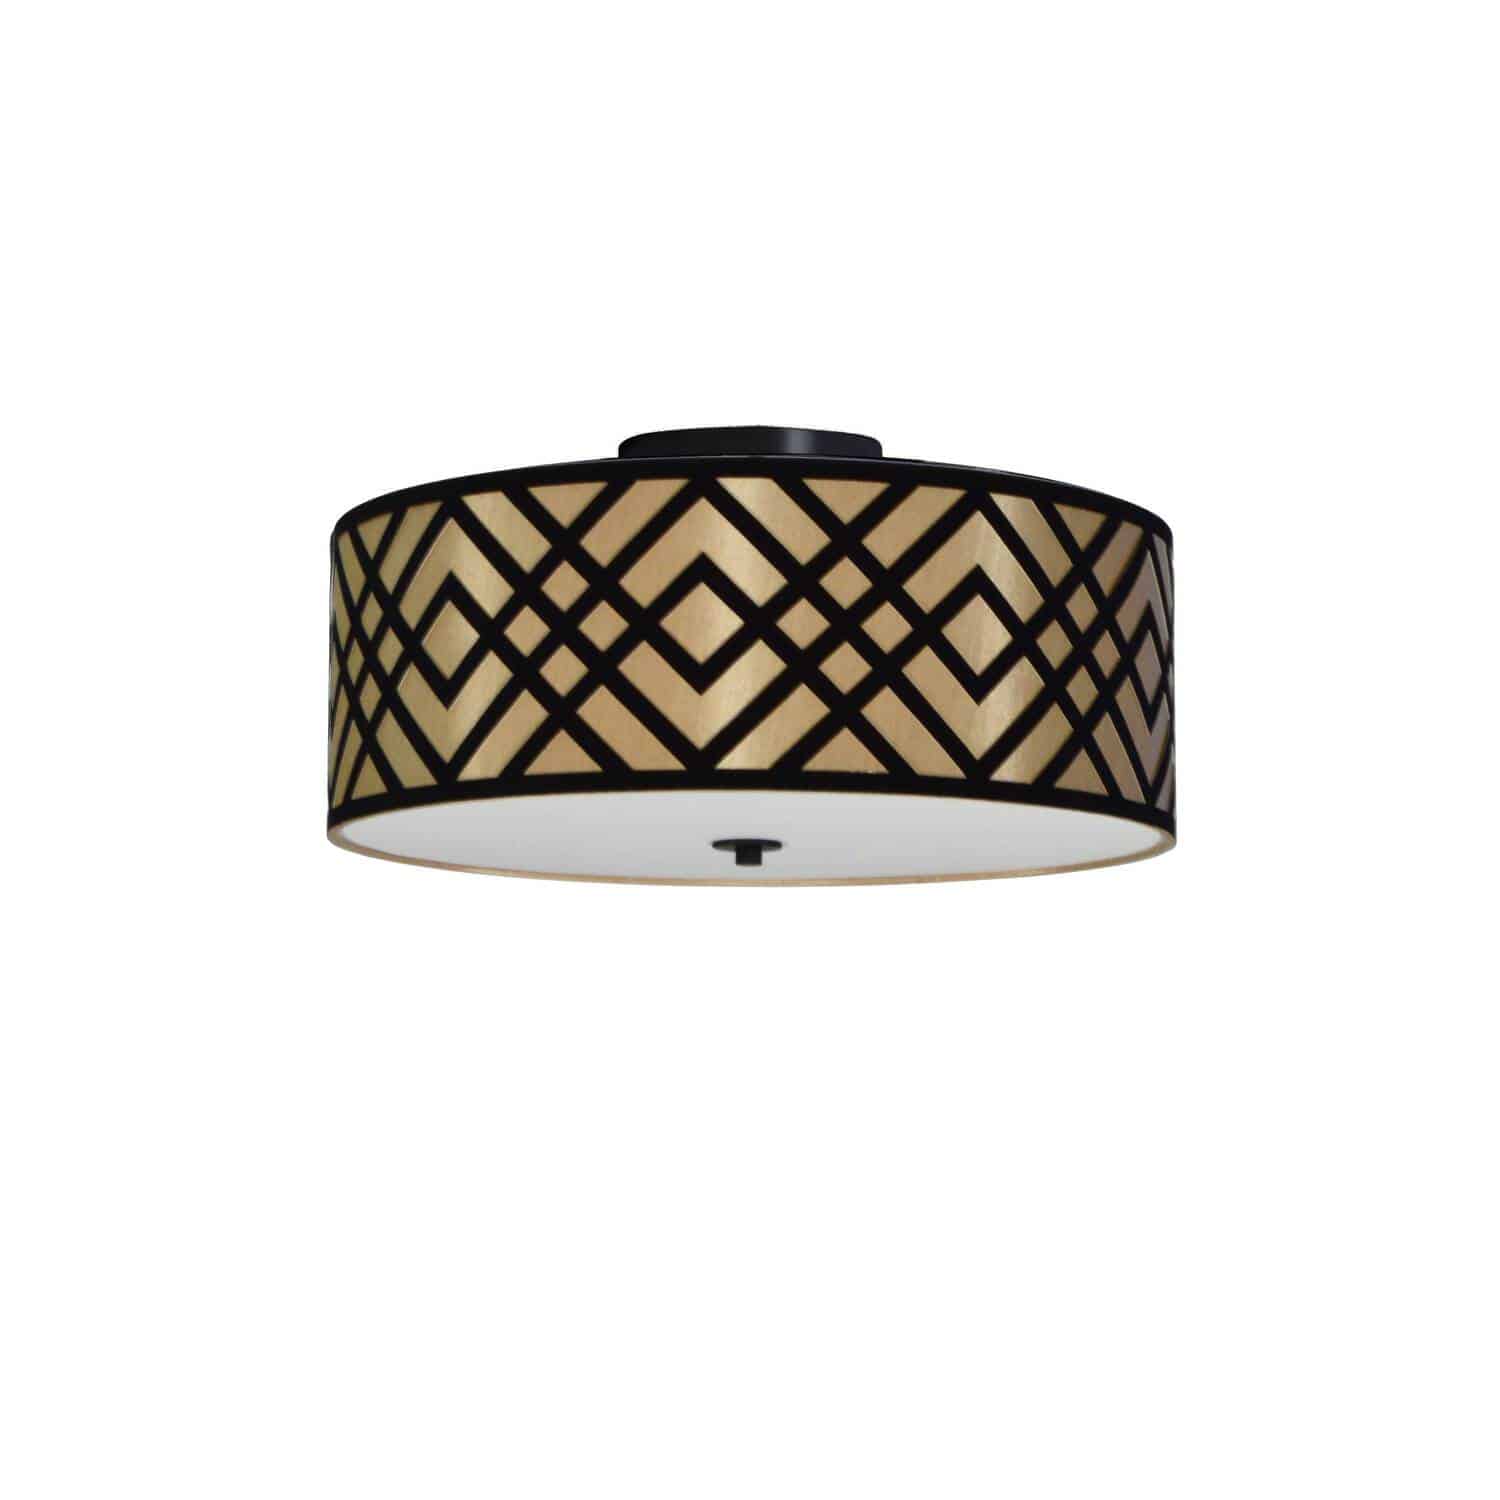 The classic drum style light fixture gets a pop of conspicuous couture style in the Mona family of lighting. Mona lighting is characterized by an eye-catching pattern with a slim profile, creating a look that can blend with a range of décor styles. A discrete metal frame holds the stylish two-color fabric shade. With warm or cool colorways available, a lighter base color is overlaid with a mesmerizing geometric patterns of criss-crossing lines. Available in flush mount or pendant configurations, it creates a fashionable focal point in living and dining rooms, foyers or main hallways.